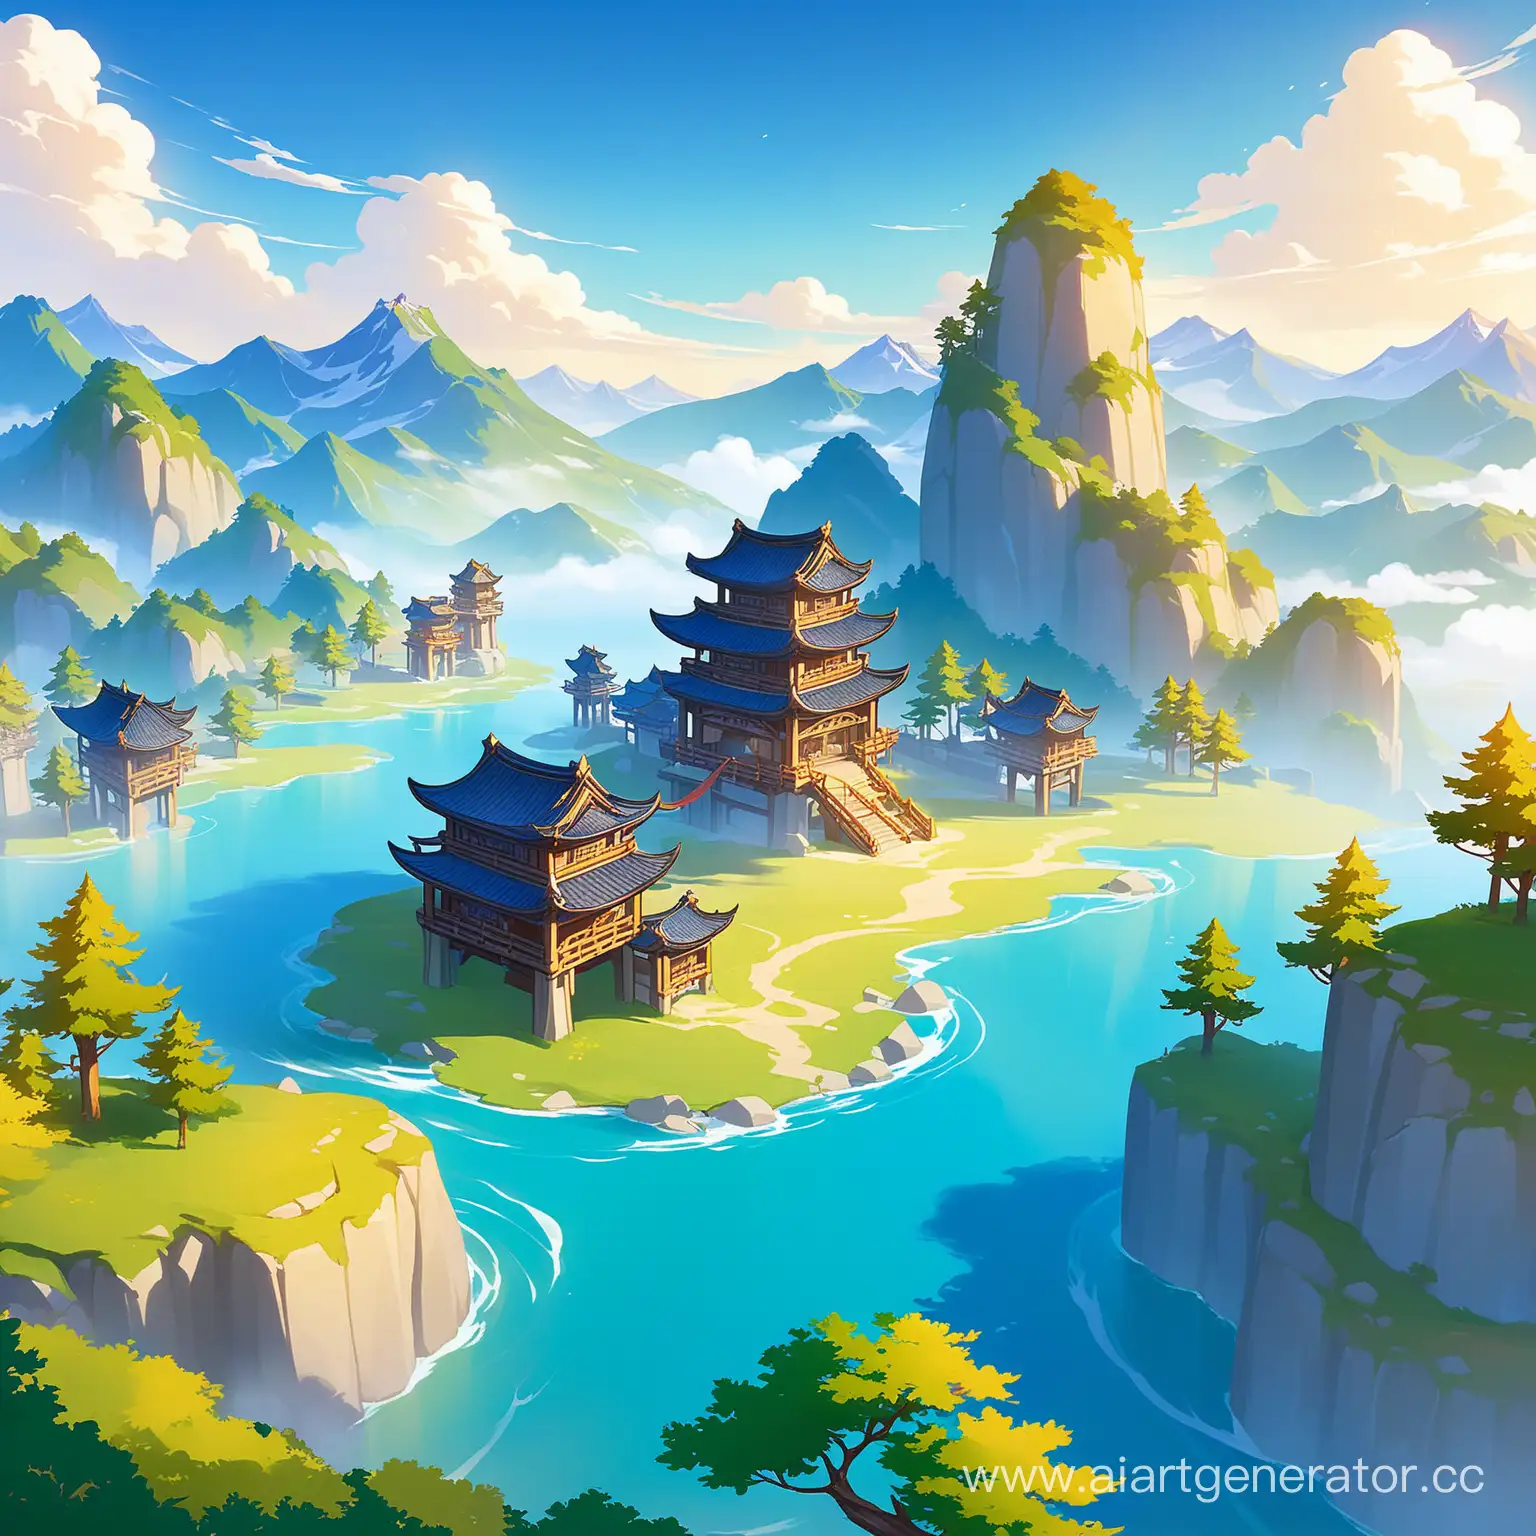 Liyue-Style-Landscape-Inspired-by-Genshin-Impact